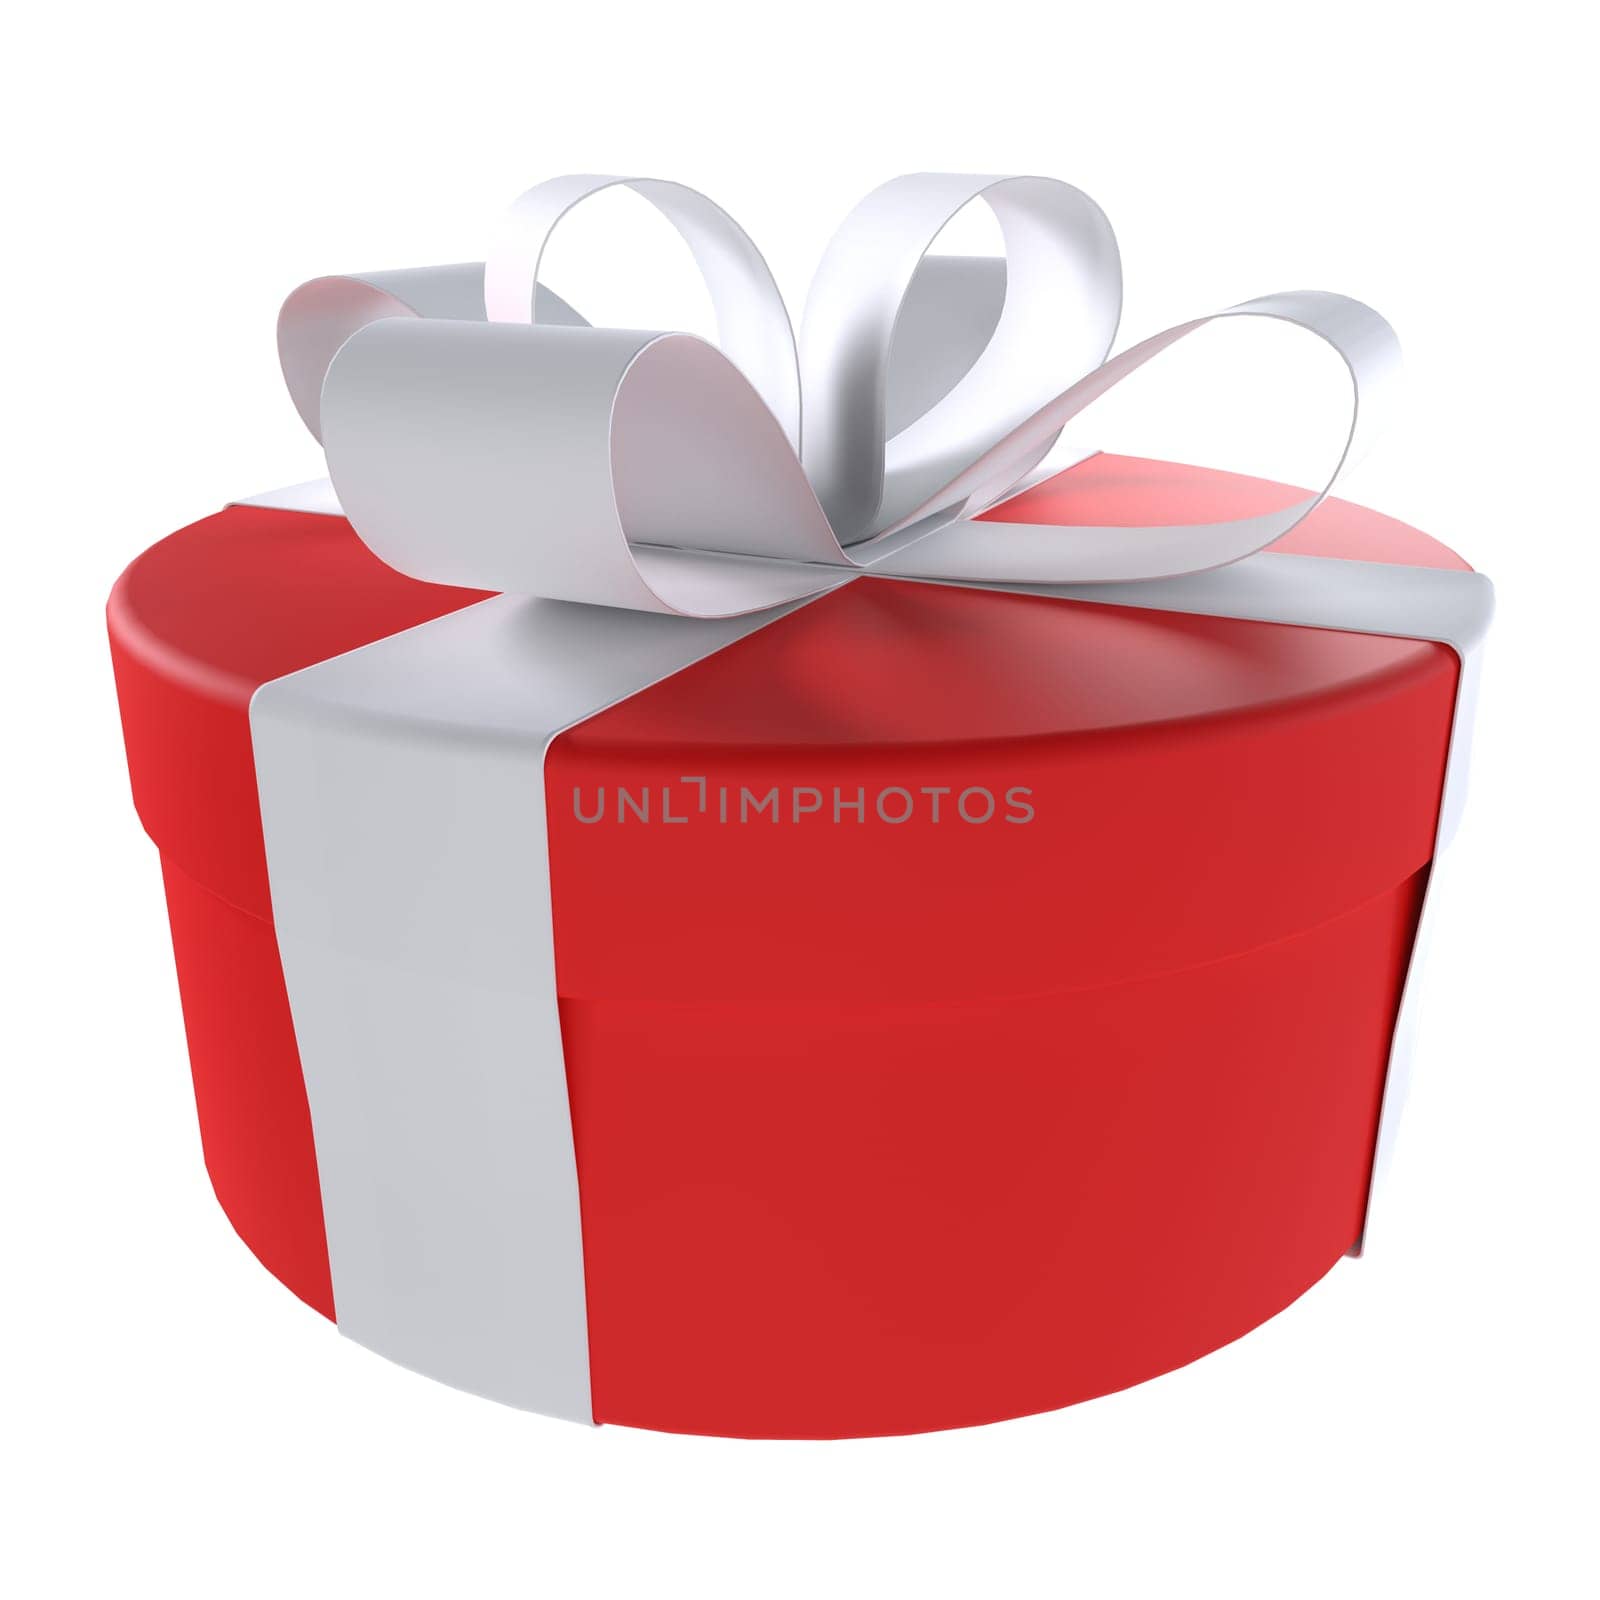 Red Gift Box isolated on white background. High quality 3d illustration